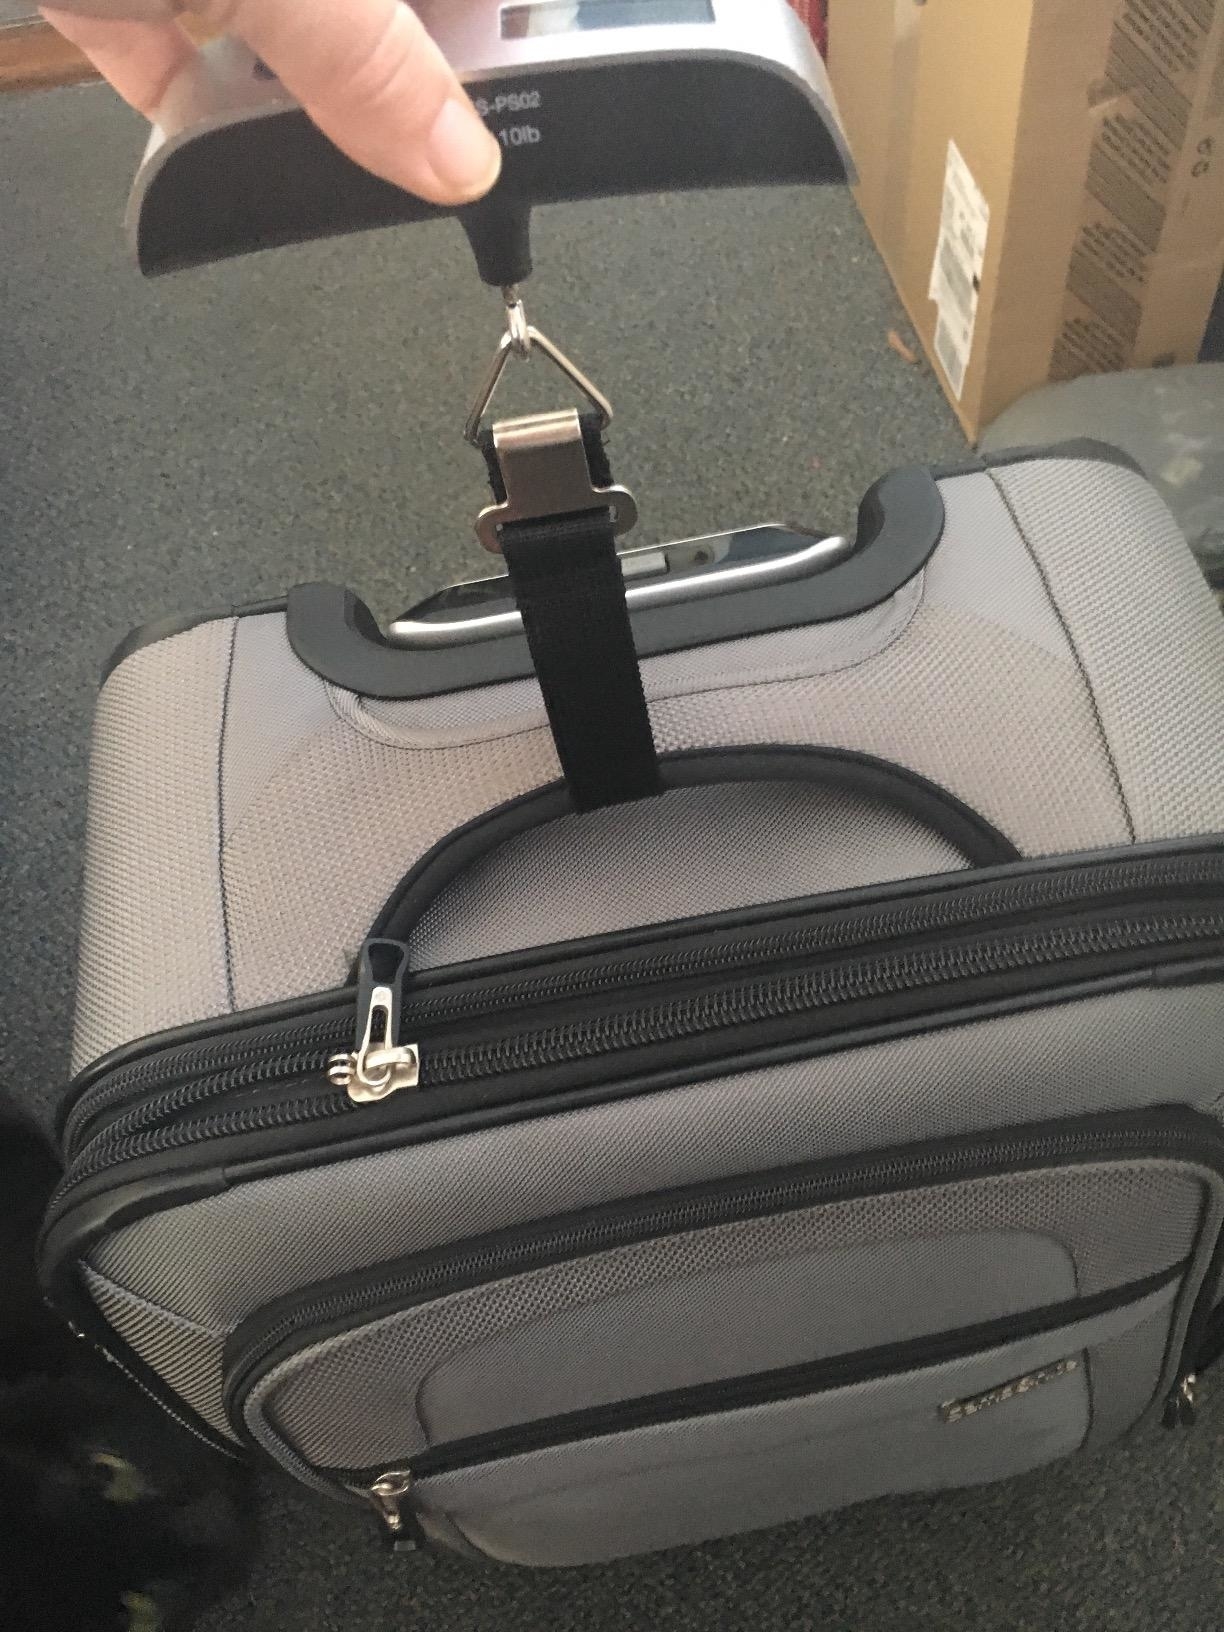 Reviewer’s photo of luggage scale weighing luggage